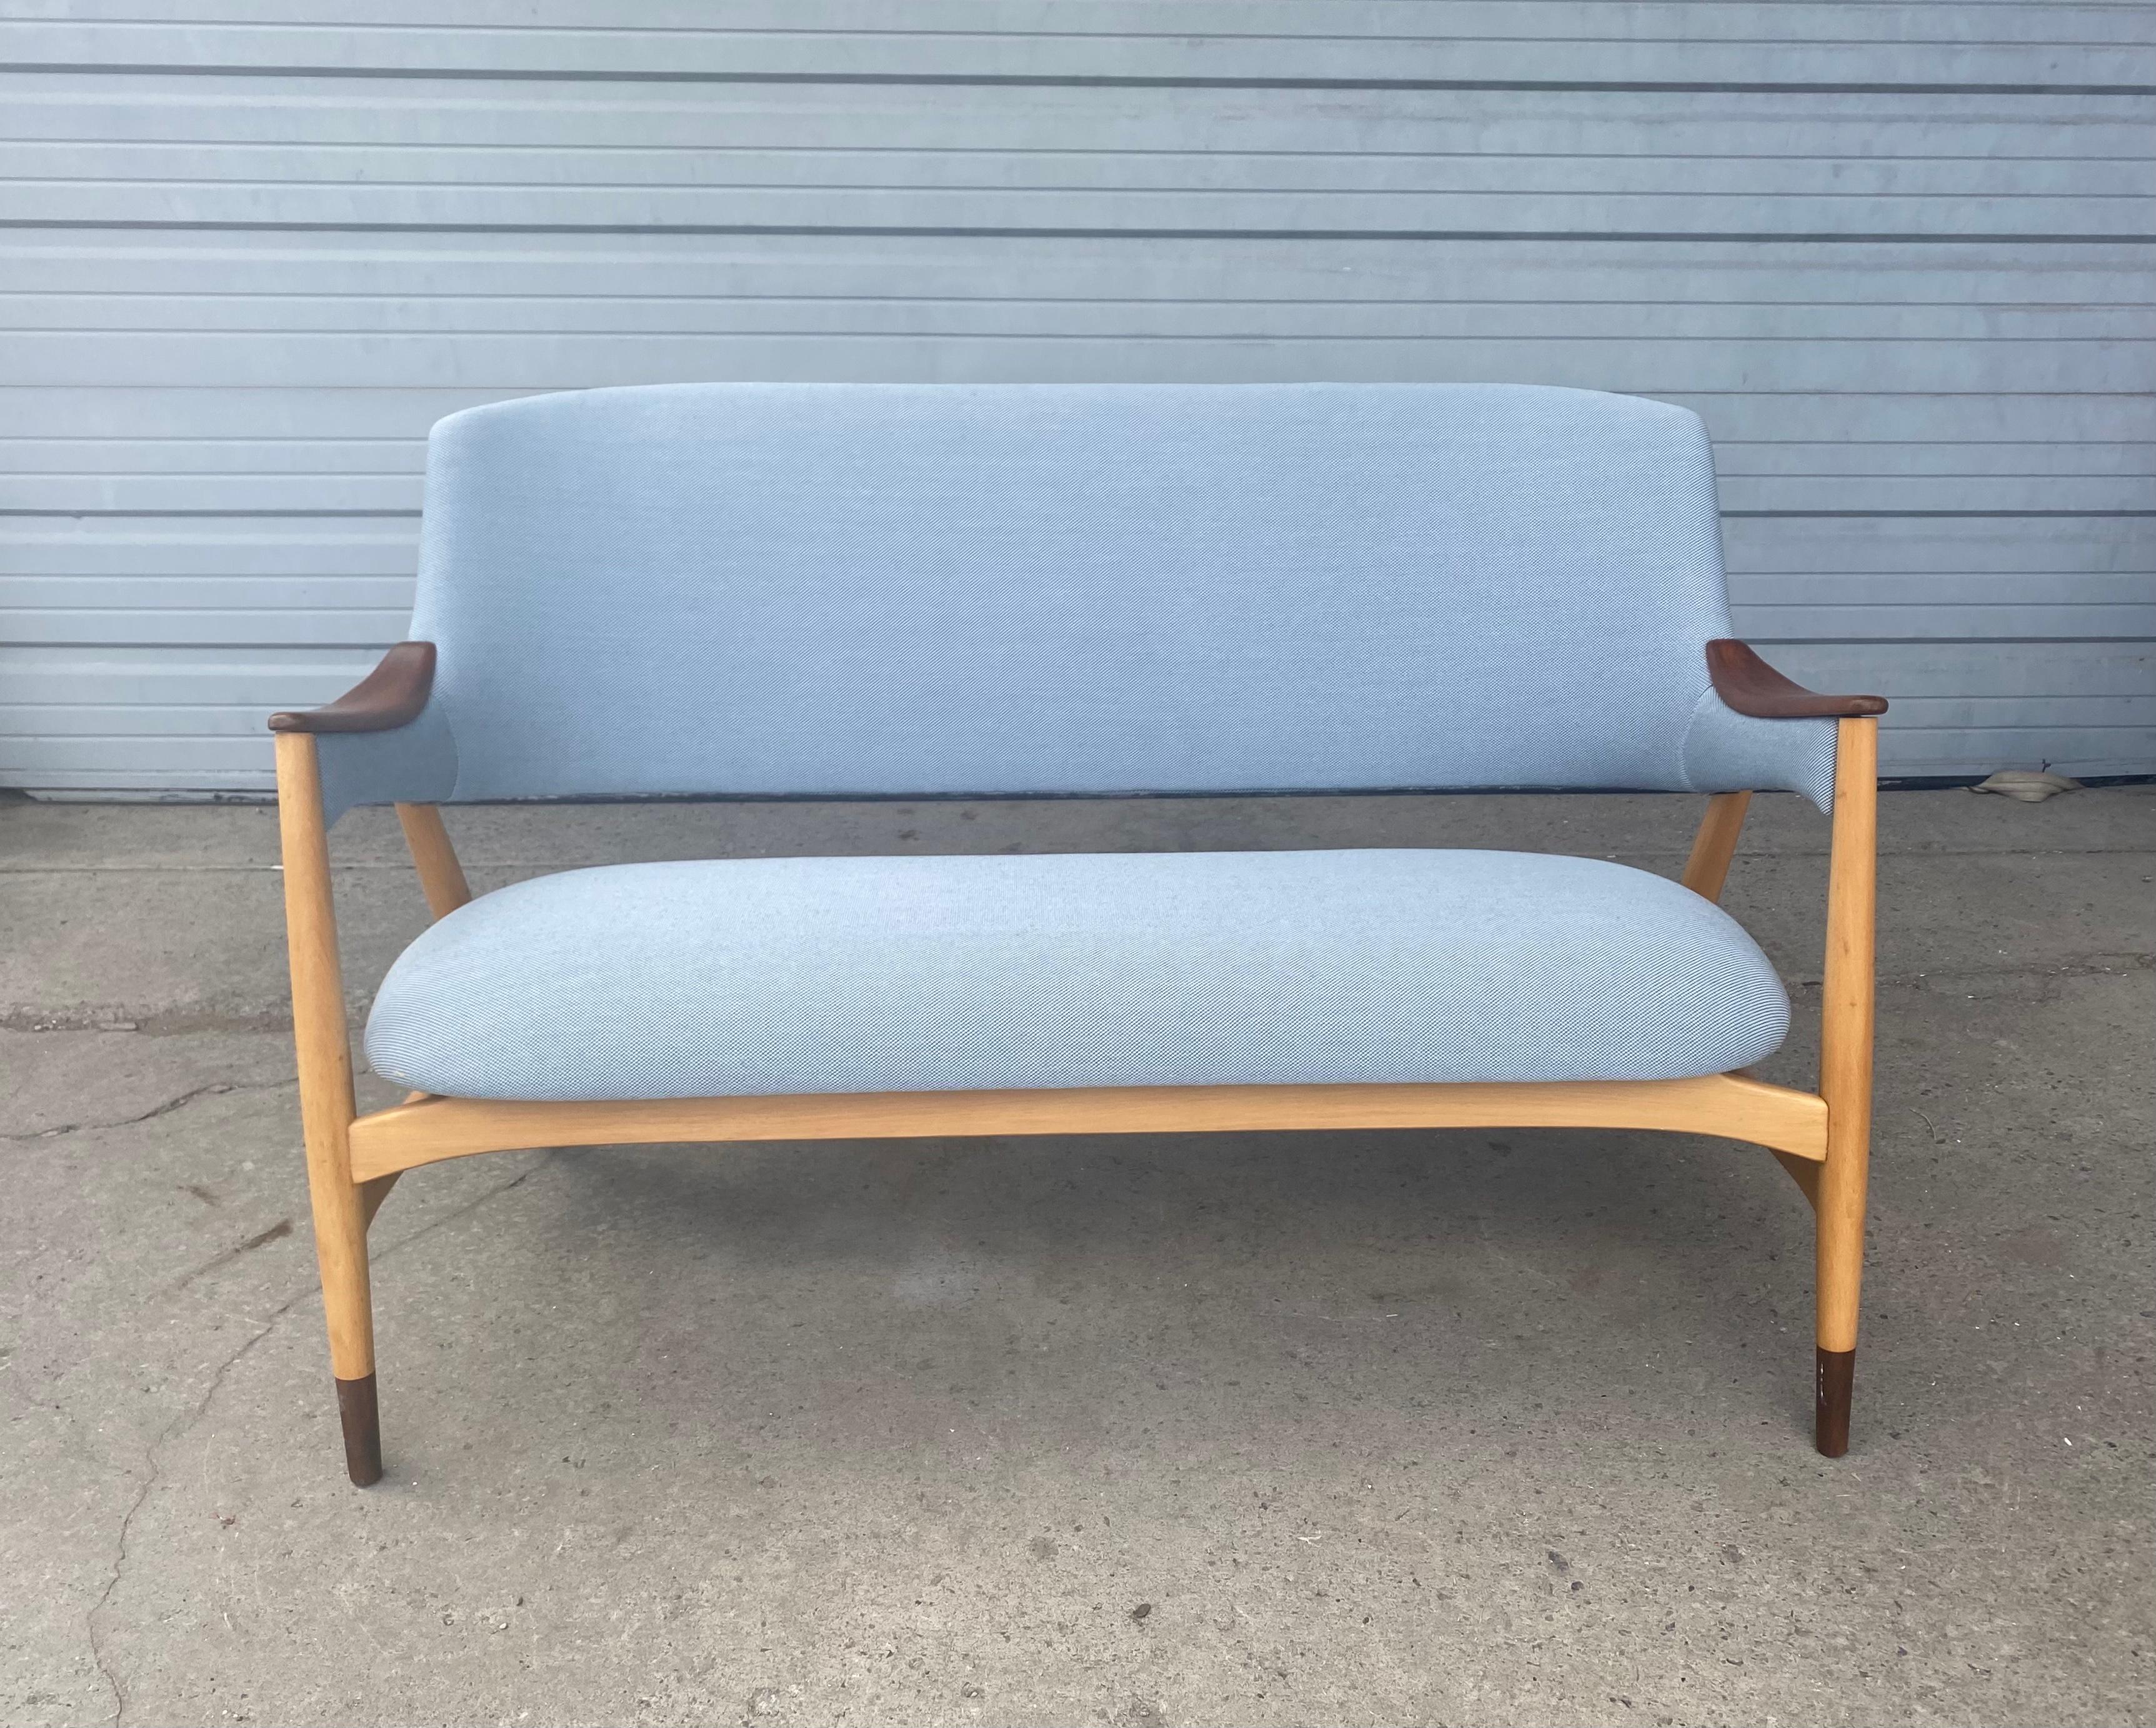 Sculptural Danish beach and teak settee designed by Jens Hjorth, Randers Stolefabrik 1950s Professionally restored reupholstered. Superior quality and construction, Extremely comfortable, Hand delivery avail to new York City or anywhere en route